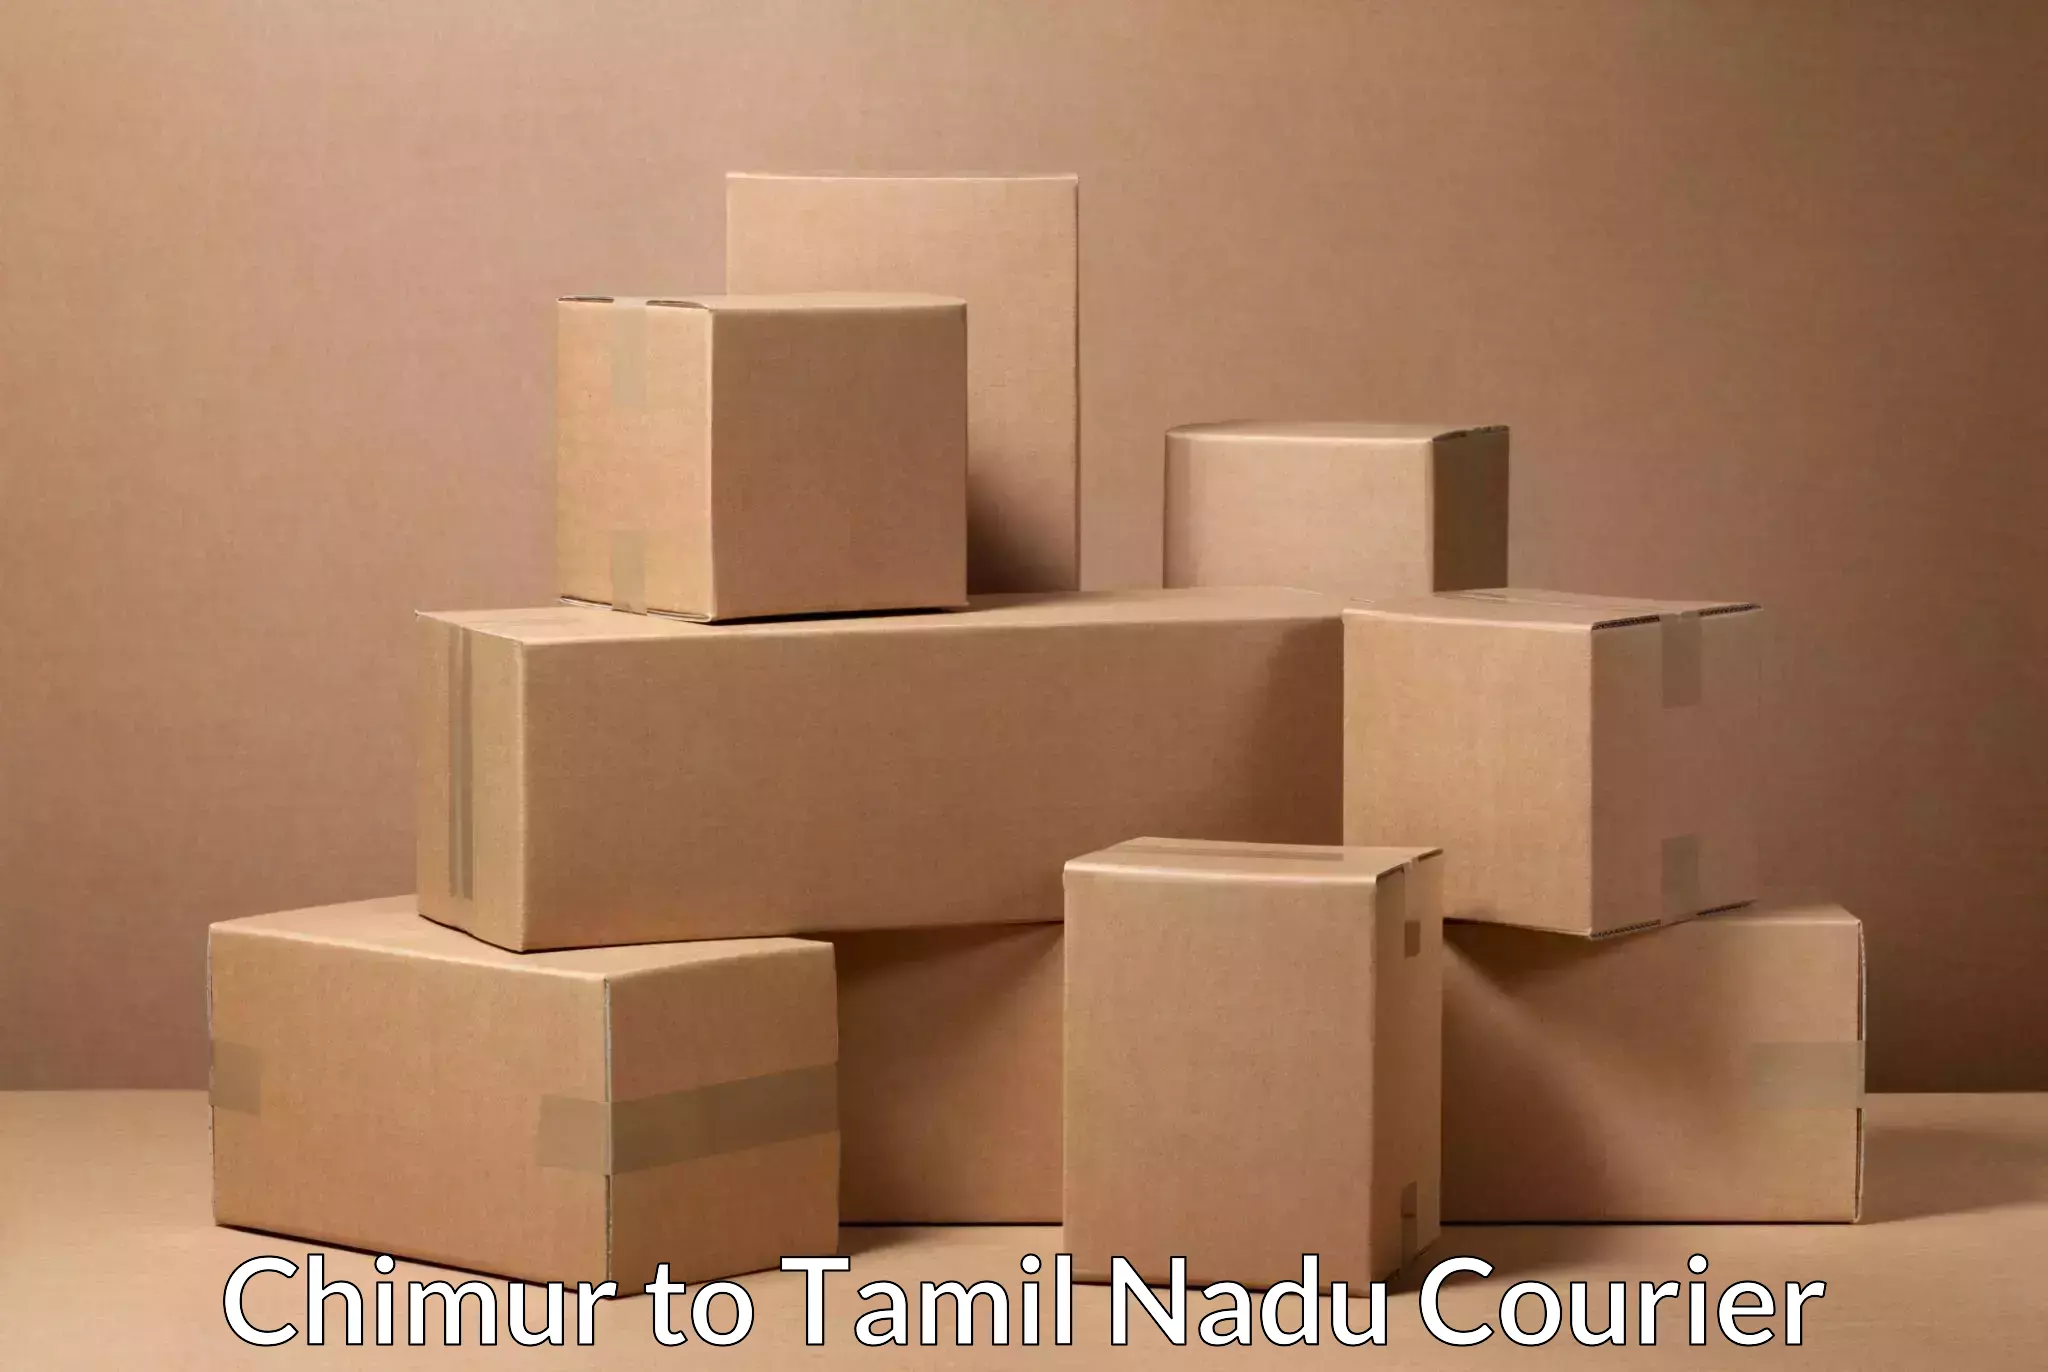 Affordable shipping rates in Chimur to Chennai Port